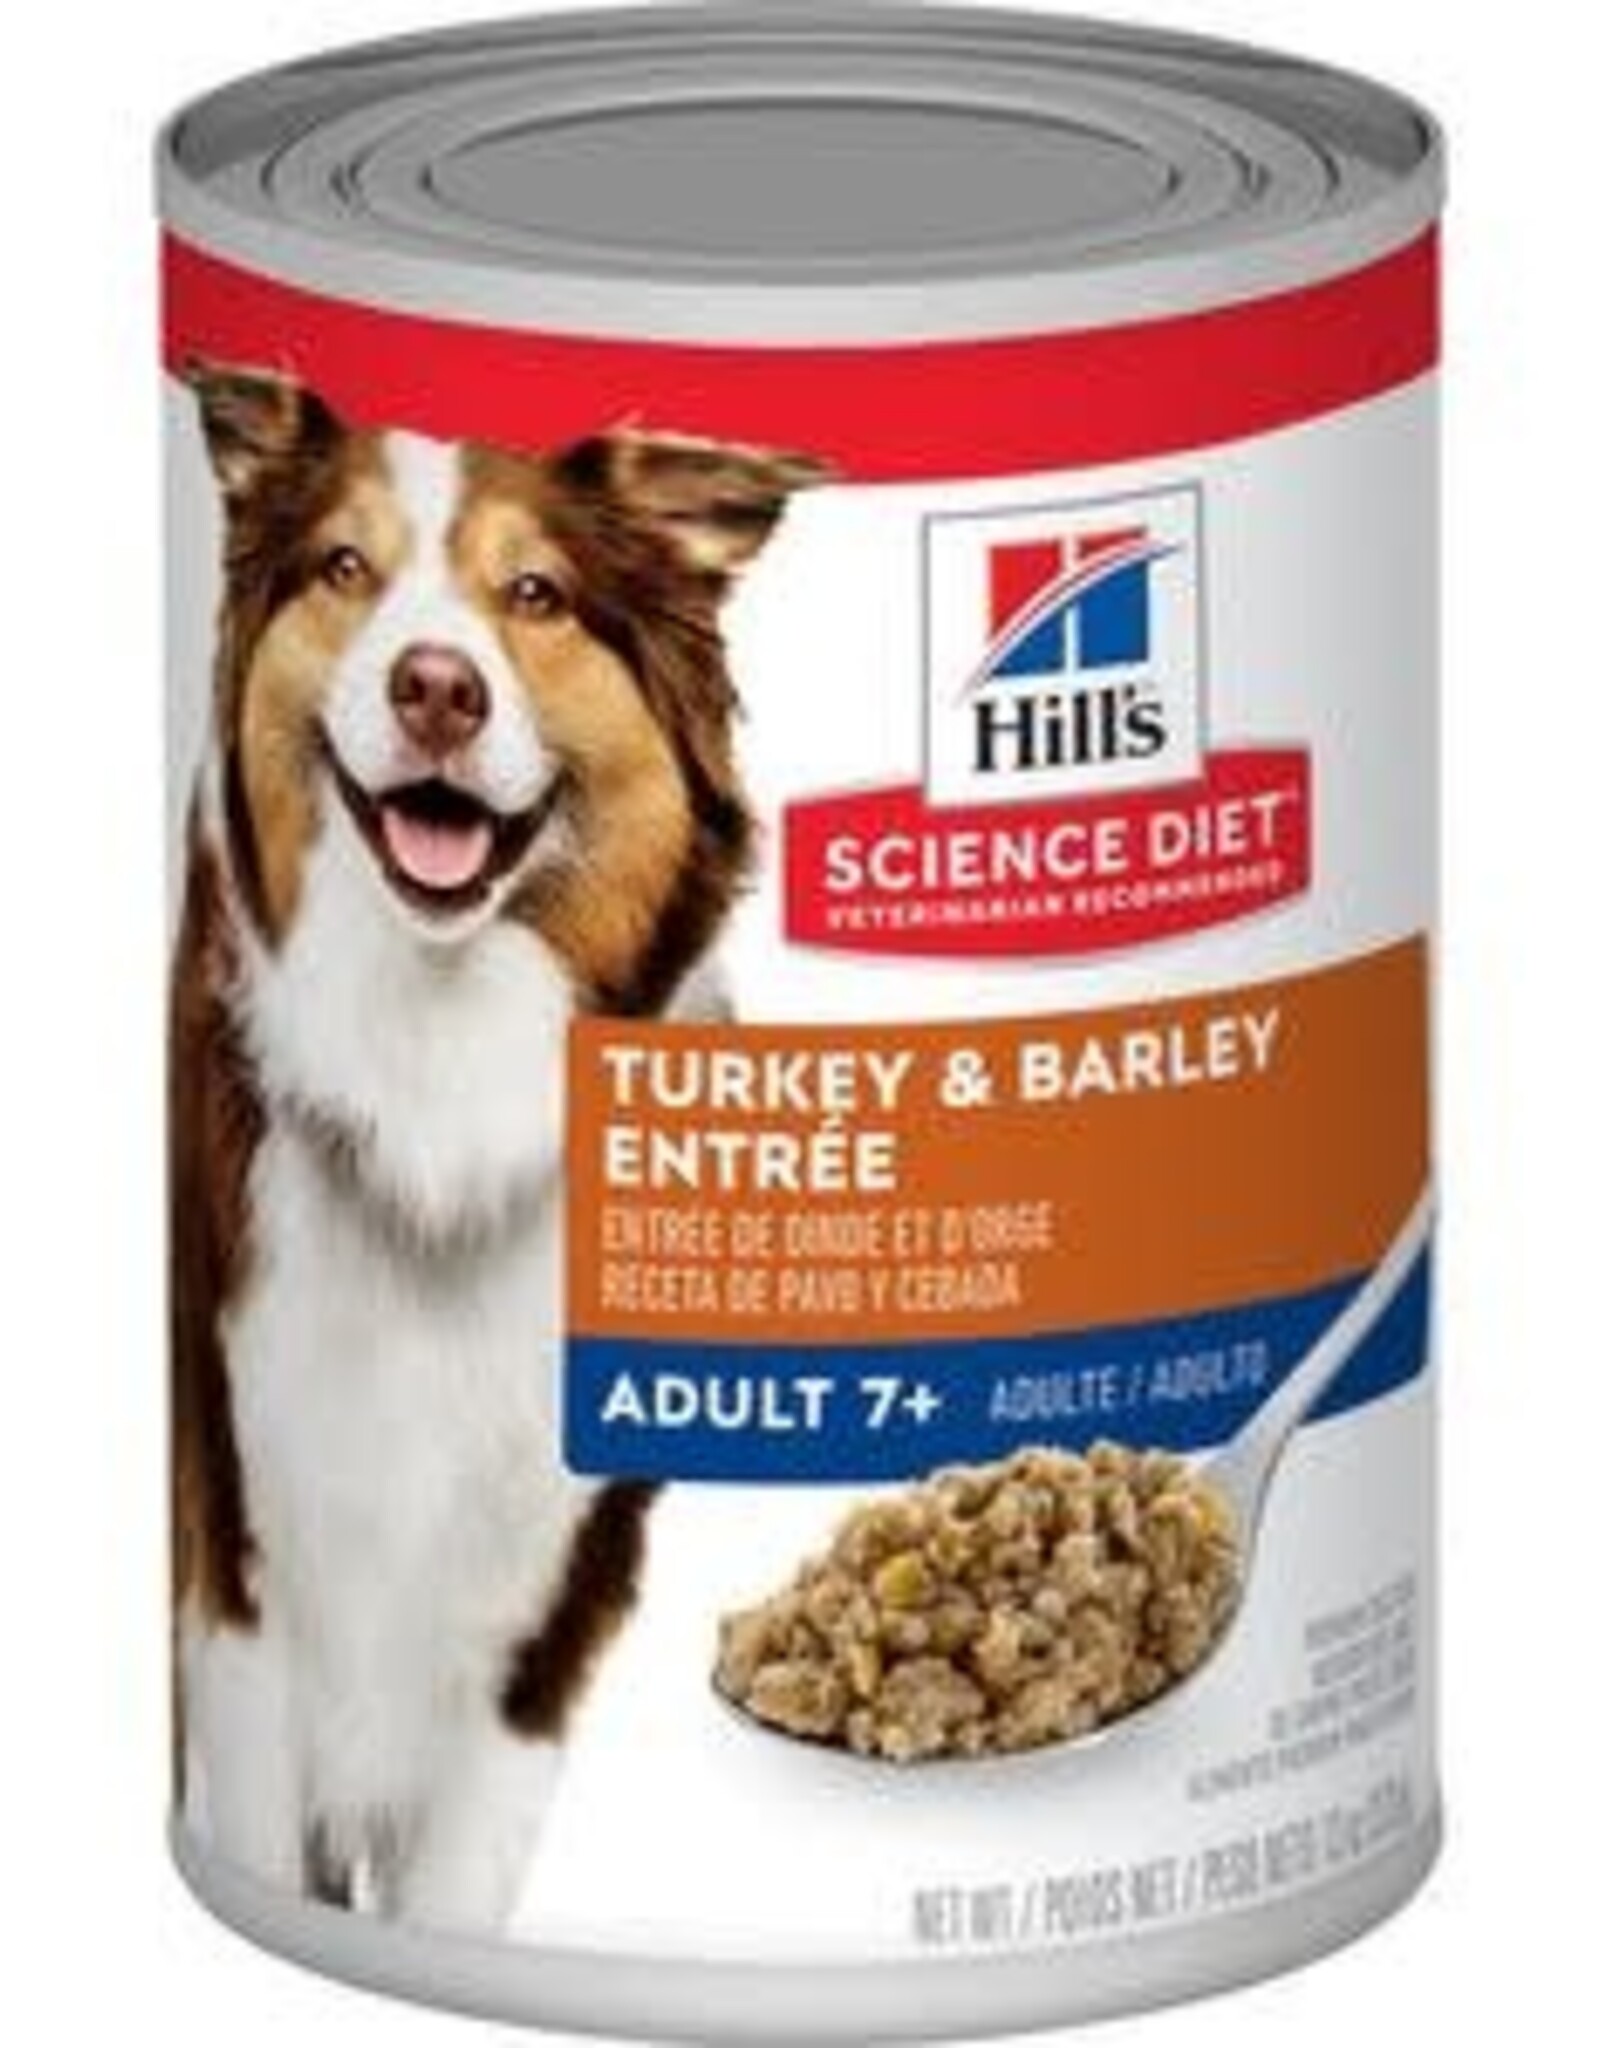 SCIENCE DIET HILL'S SCIENCE DIET DOG MATURE TURKEY & BARLEY CAN 13 OZ CASE OF 12